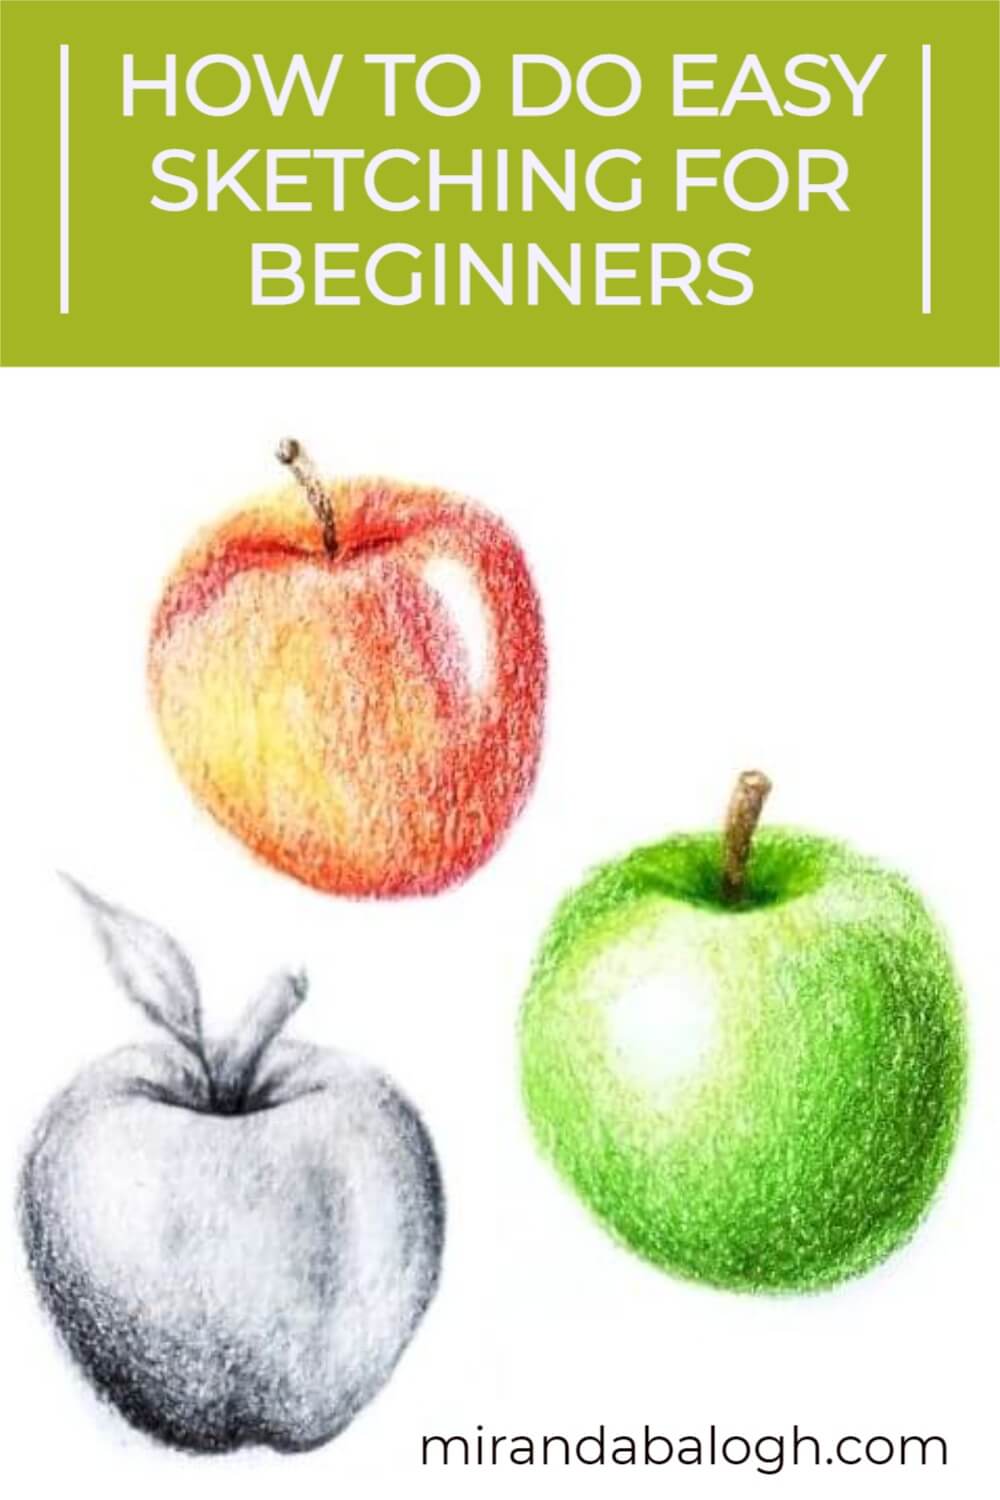 How To Do Easy Sketching For Beginners